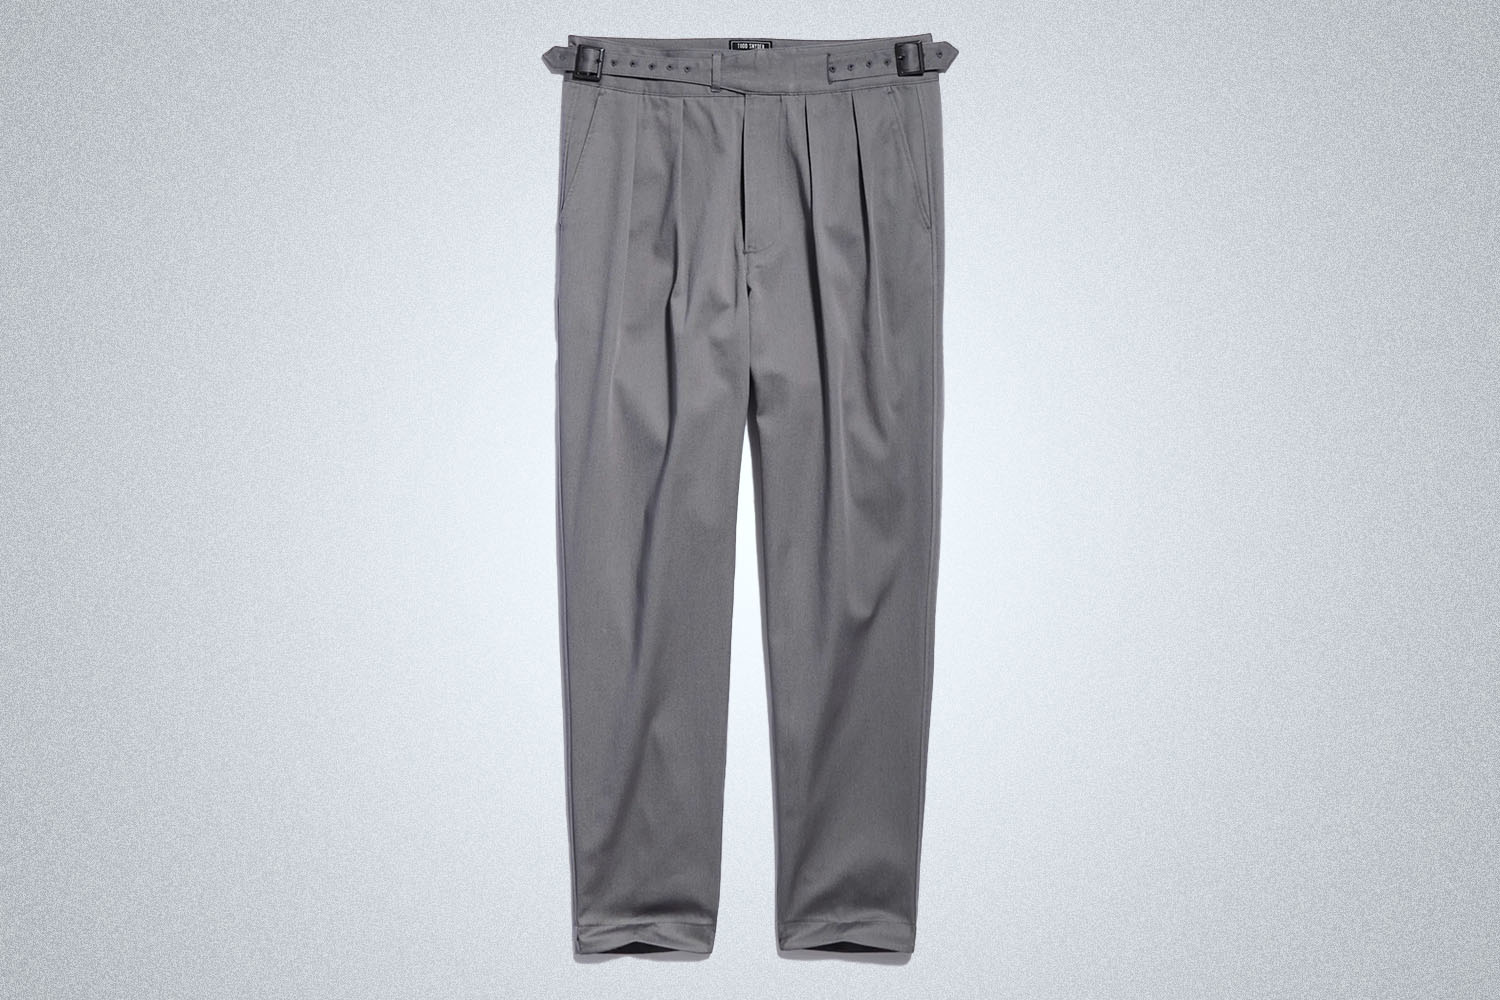 a pair of grey Gurkha style pants from Todd Snyder on a grey background